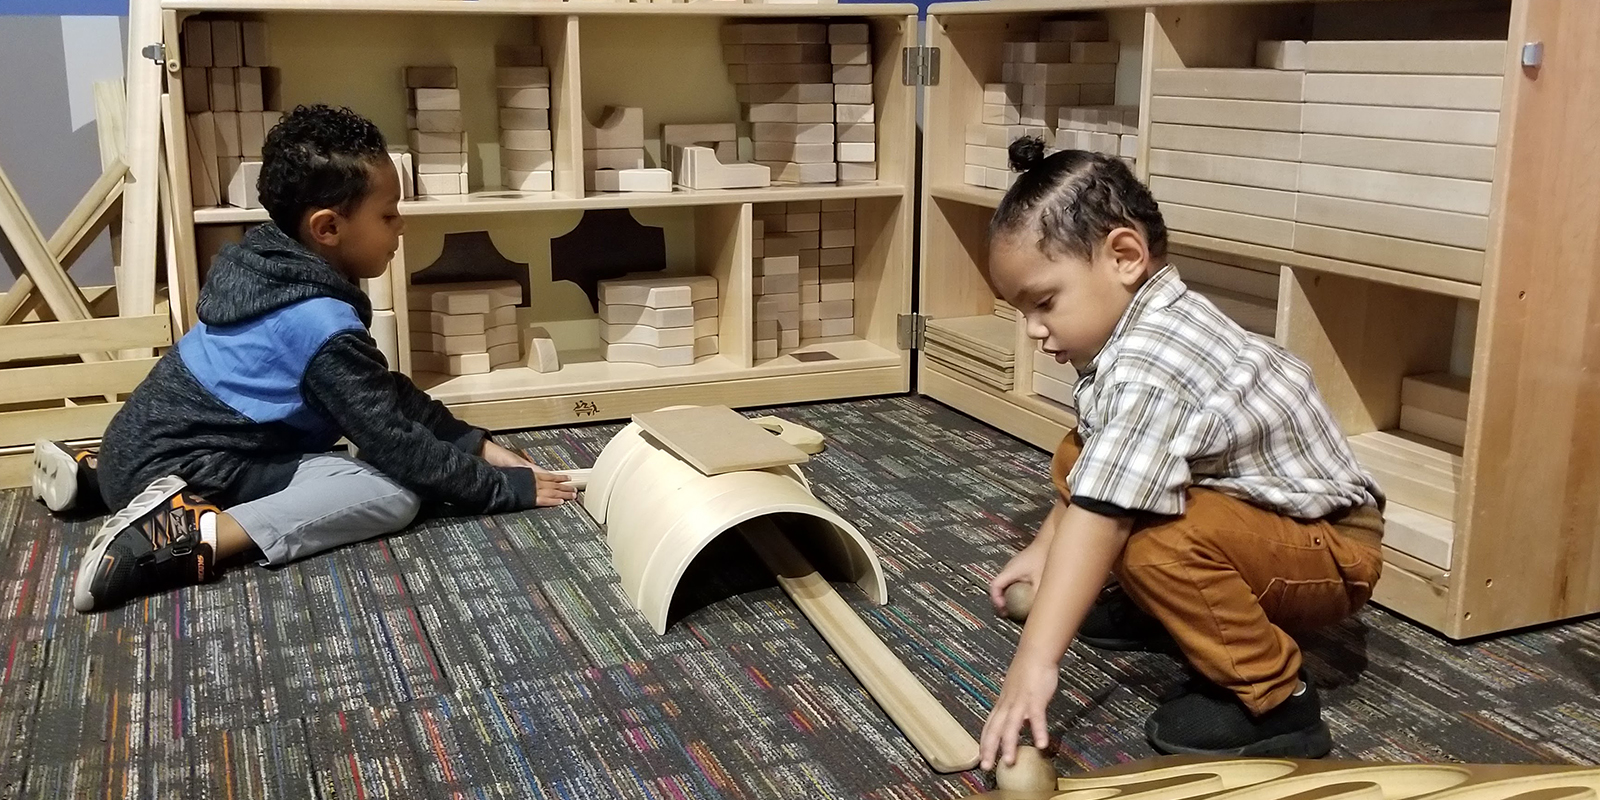 Two young boys playing with wooden block pieces